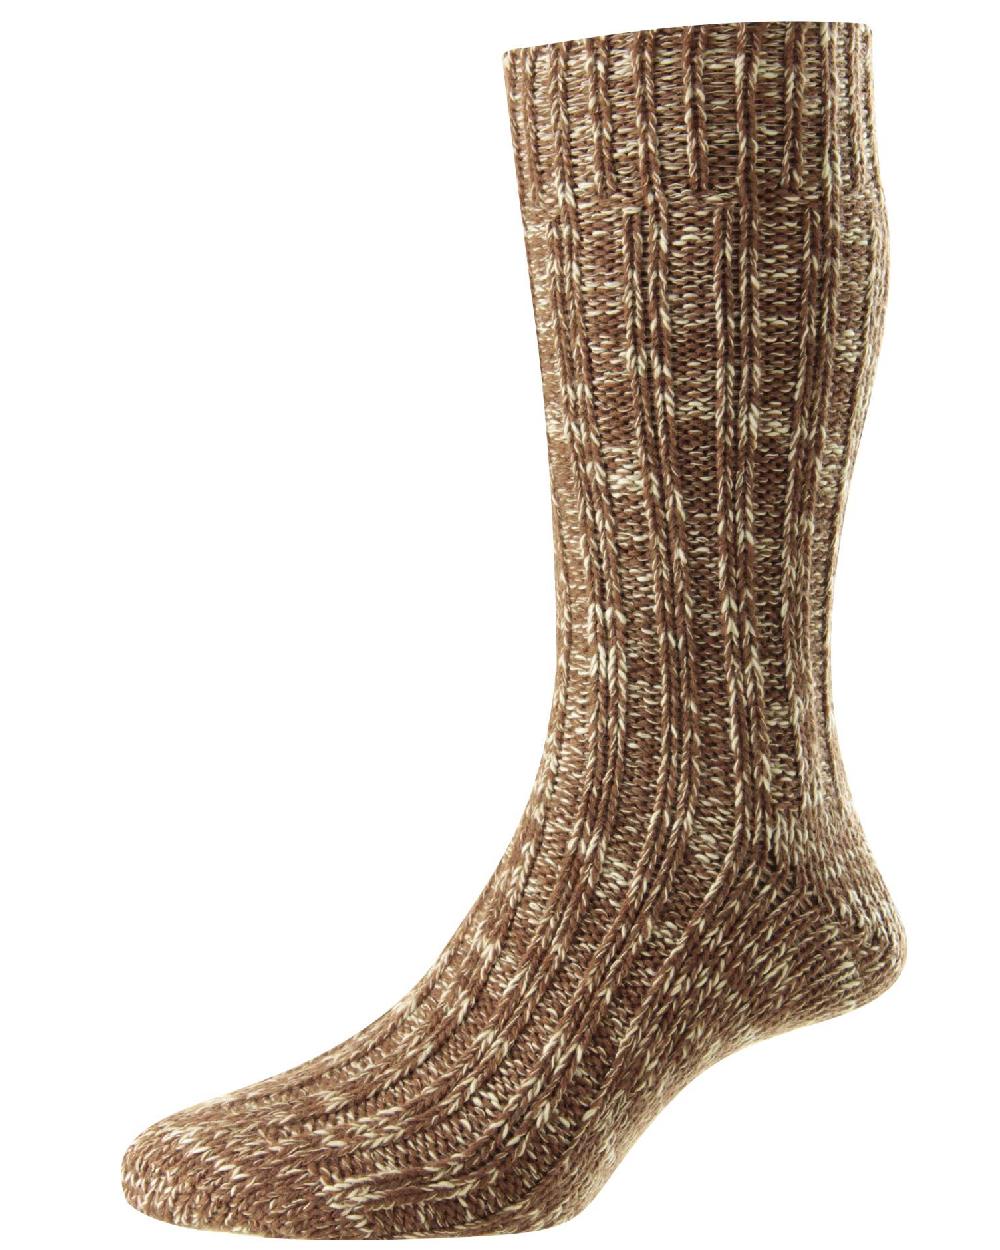 HJ Hall Mens Chunky Knit Wool &amp; Cotton Blend Socks in Brown Marl 